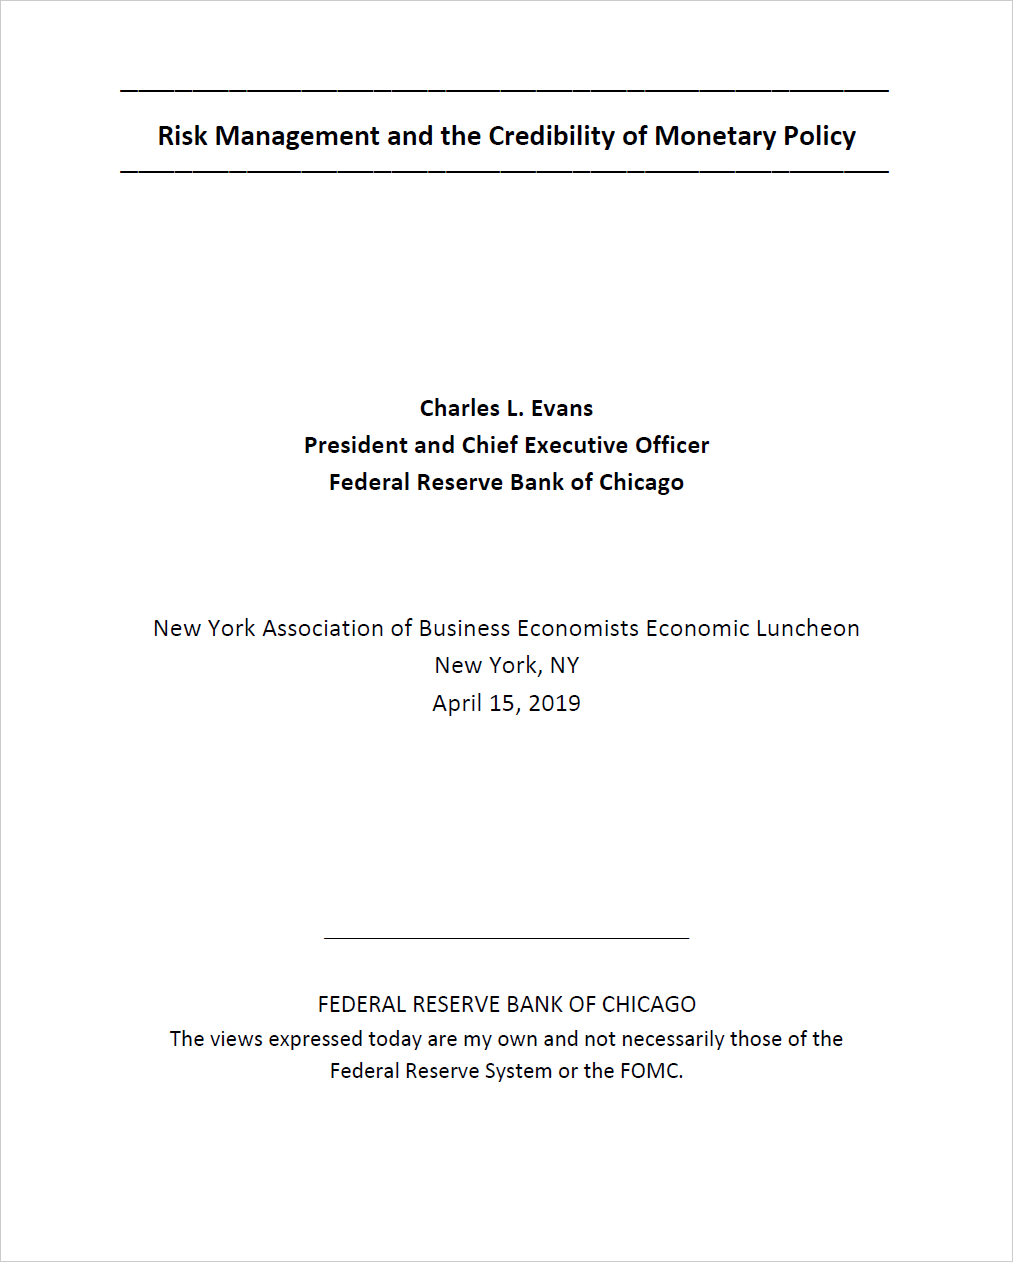 The cover page of a speech from Chicagofed.org.